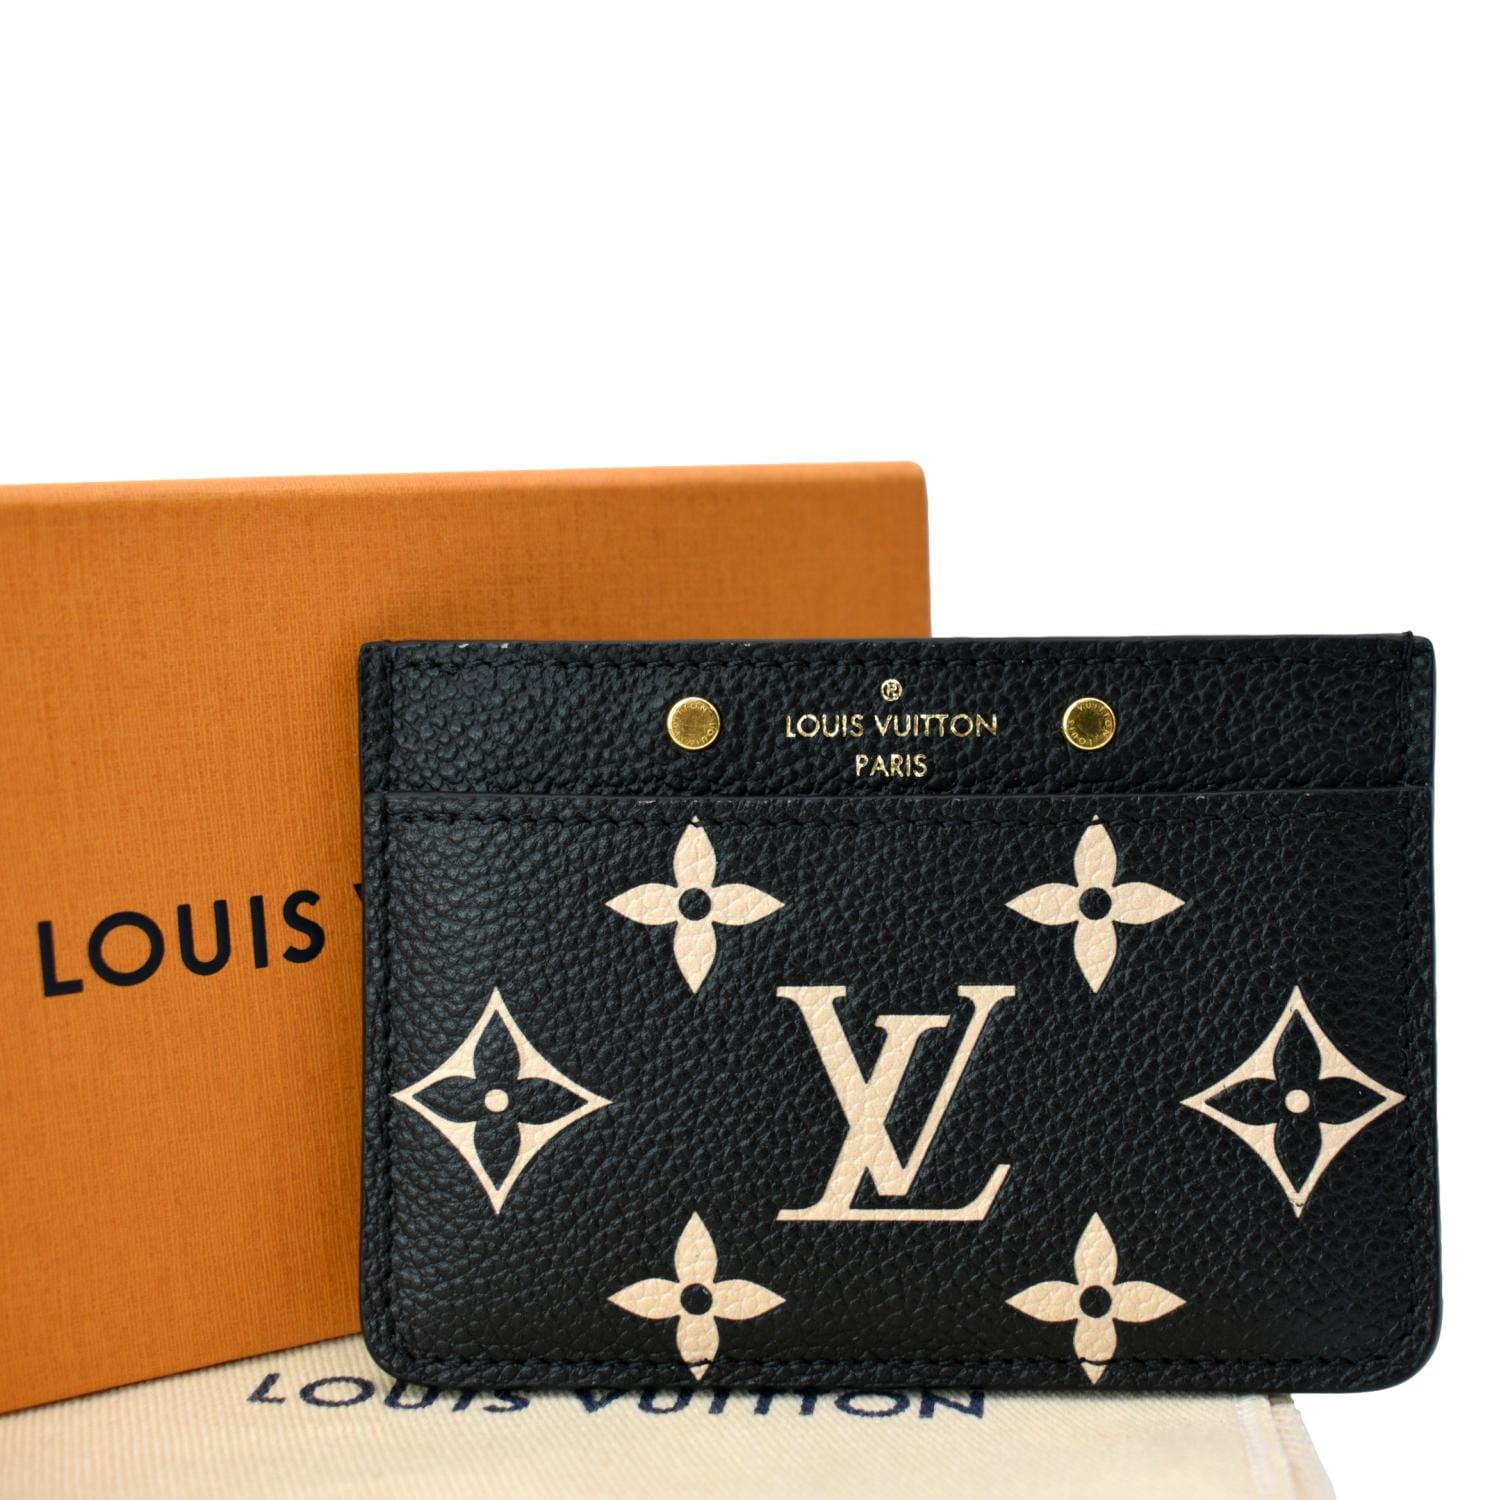 Card Holder  Luxury All Wallets and Small Leather Goods  Wallets and  Small Leather Goods  Women M69174  LOUIS VUITTON